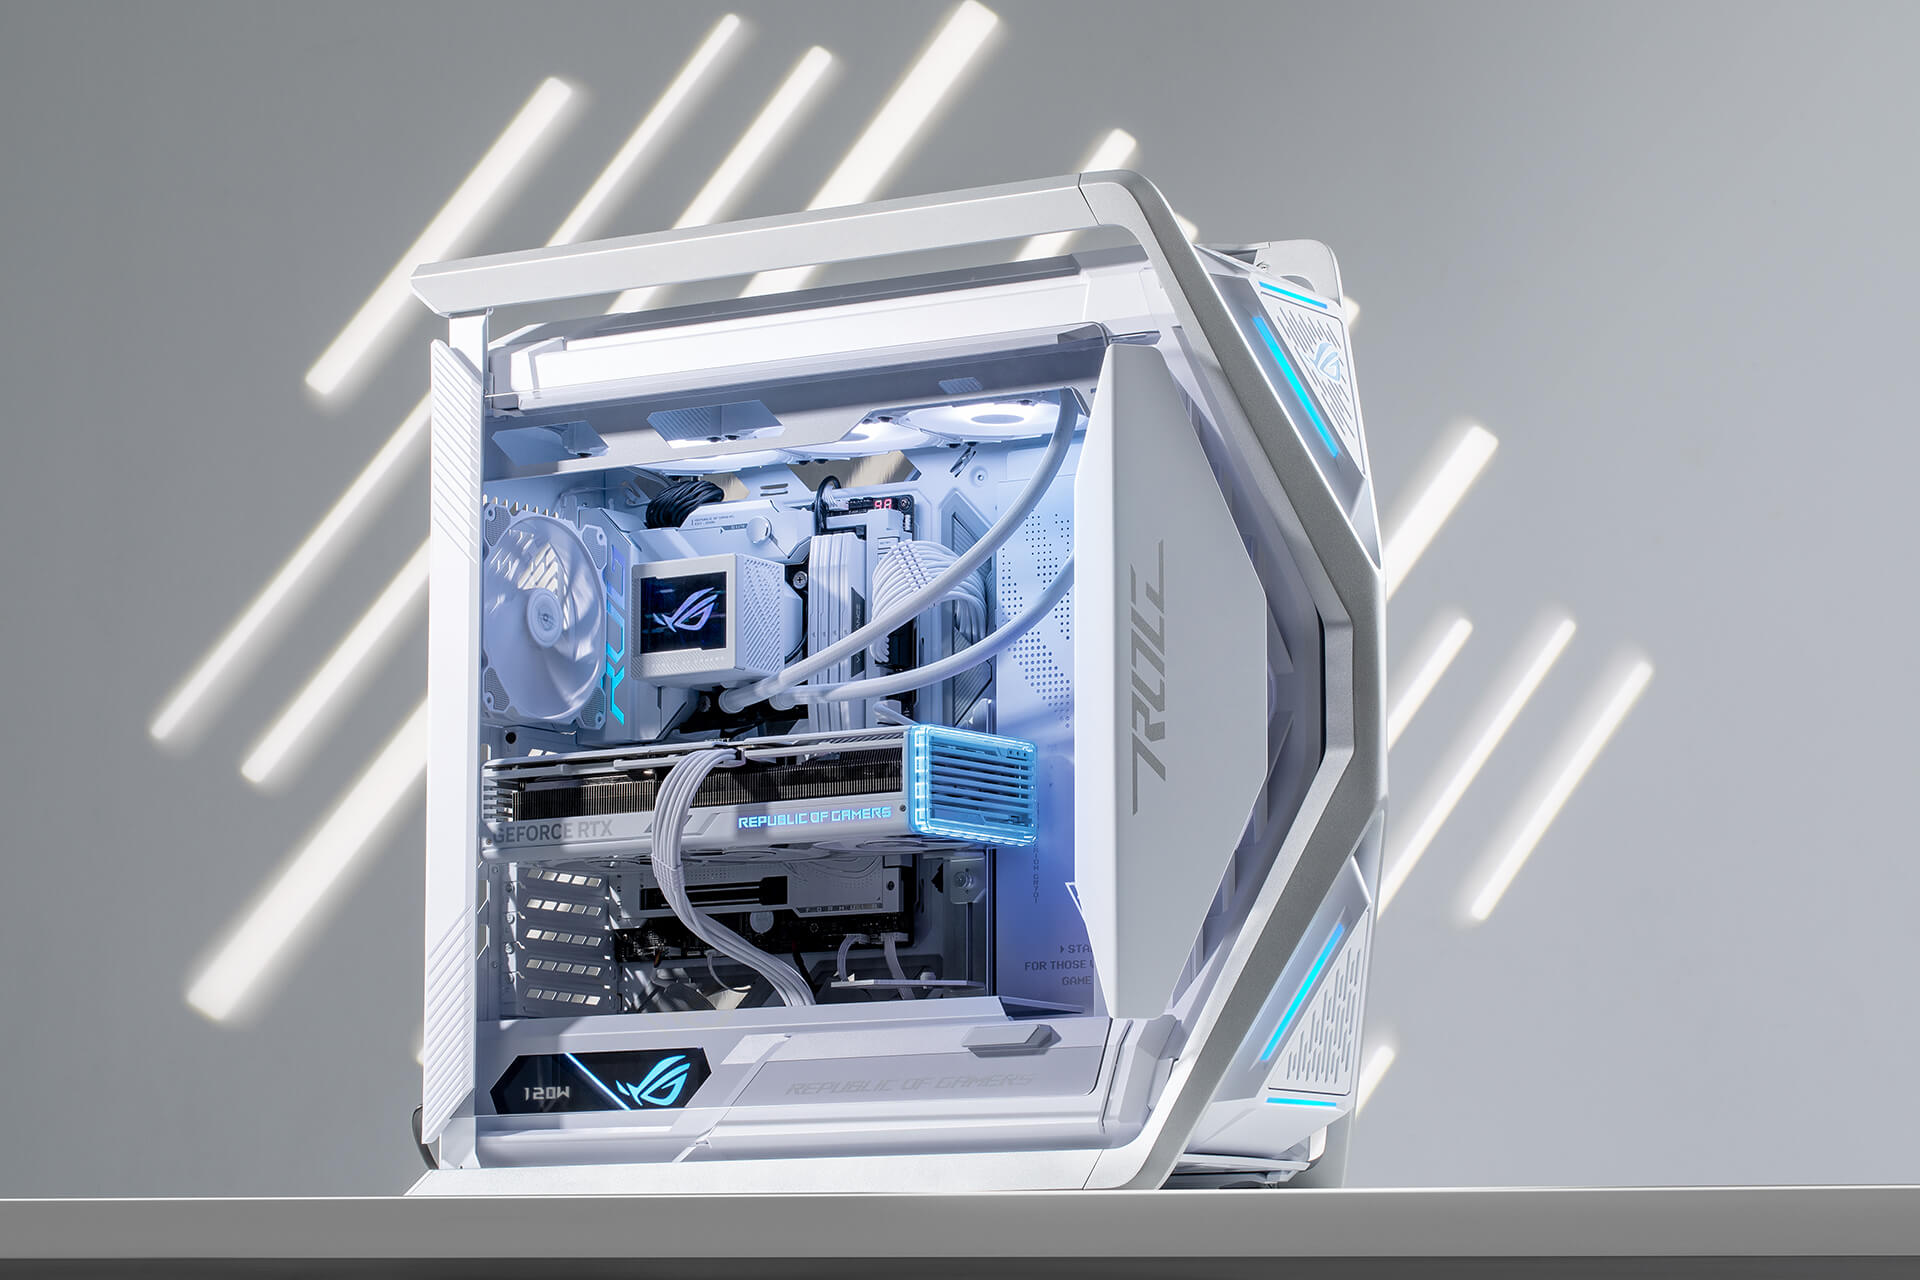 A 45-degree angle shot of the ROG Maximus Z790 Formula PC Build paired with the ROG Ryujin III 360 ARGB White Edition.